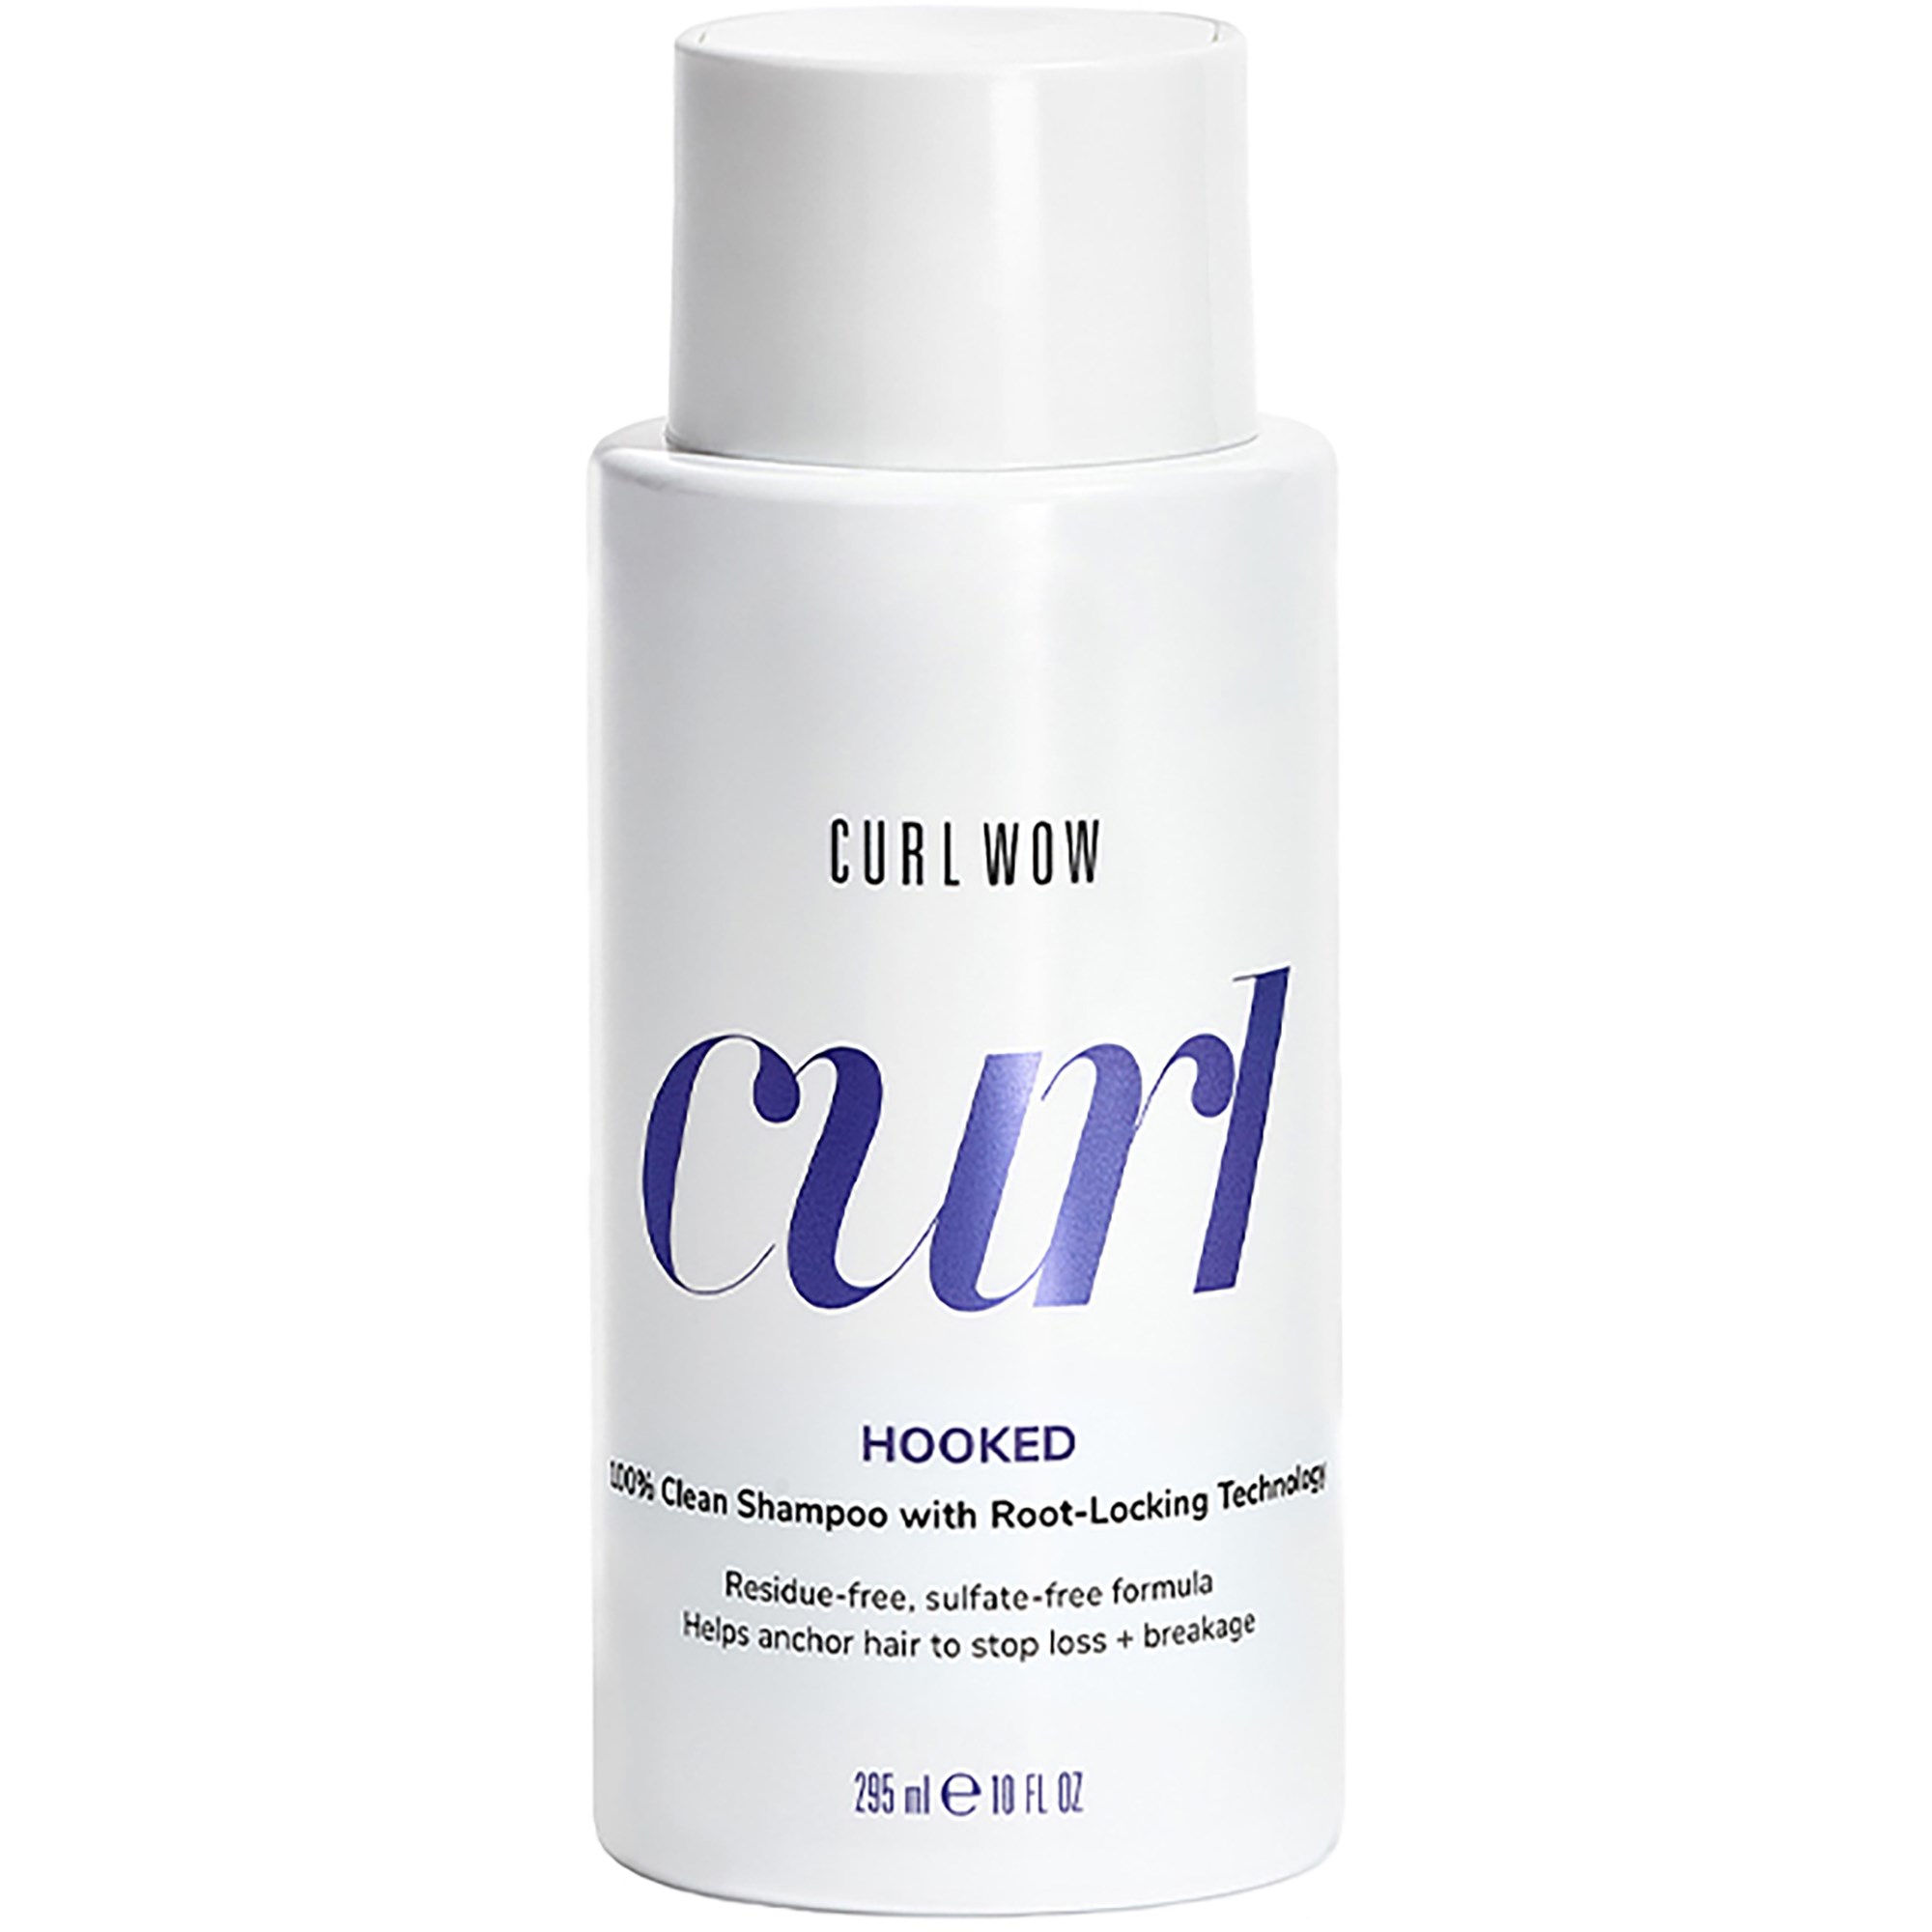 Color Wow Curl Curl Wow Hooked Shampoo 295 ml